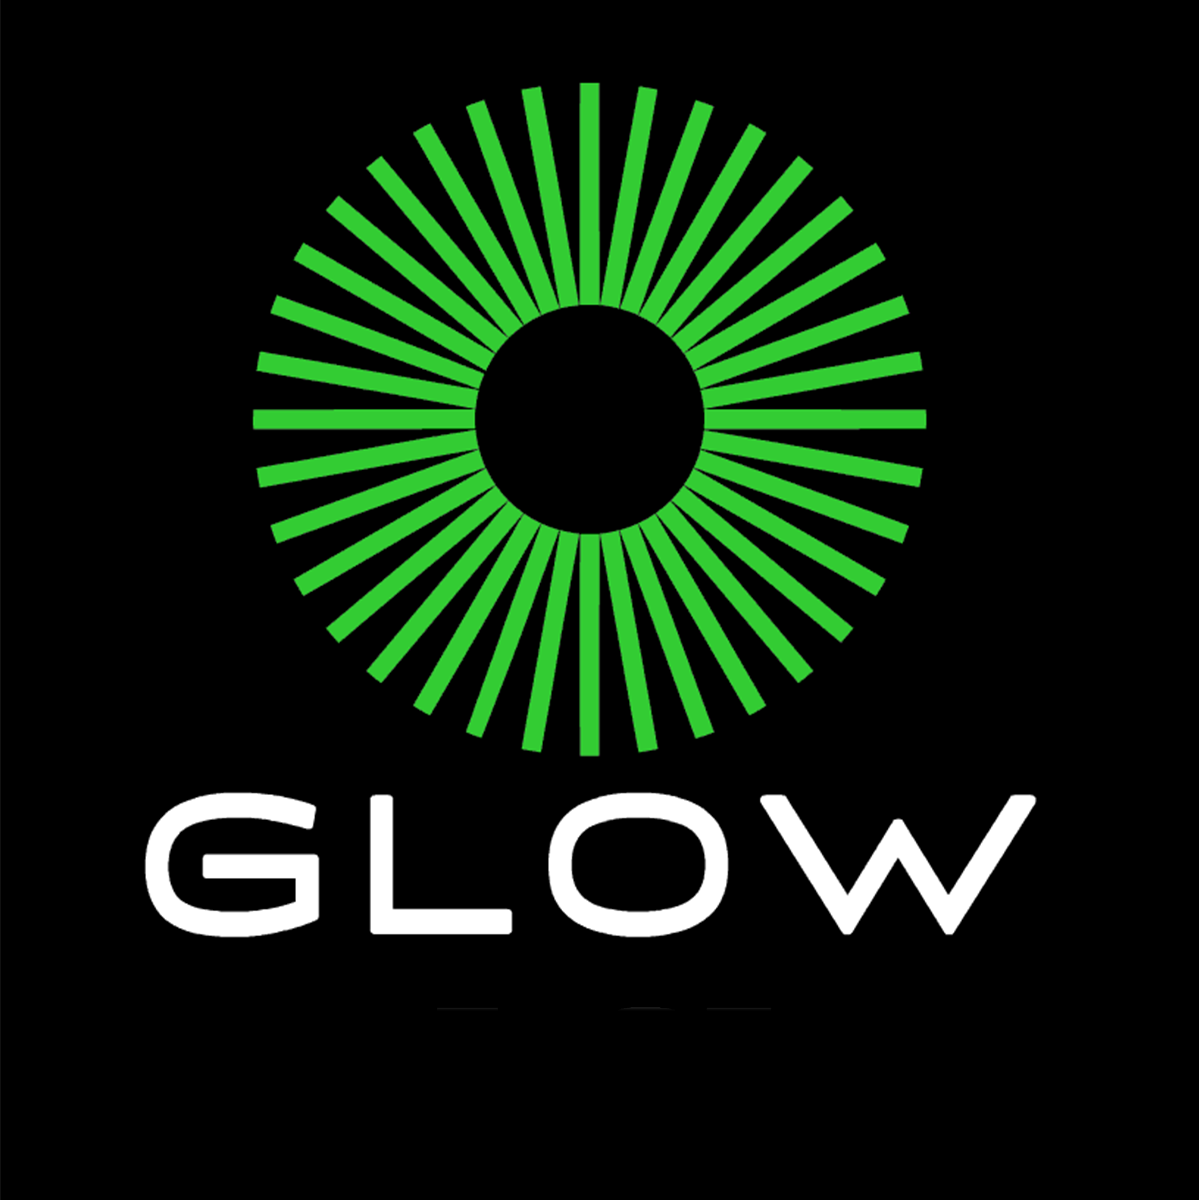 Glow Cycle fitness classes in Columbia MD